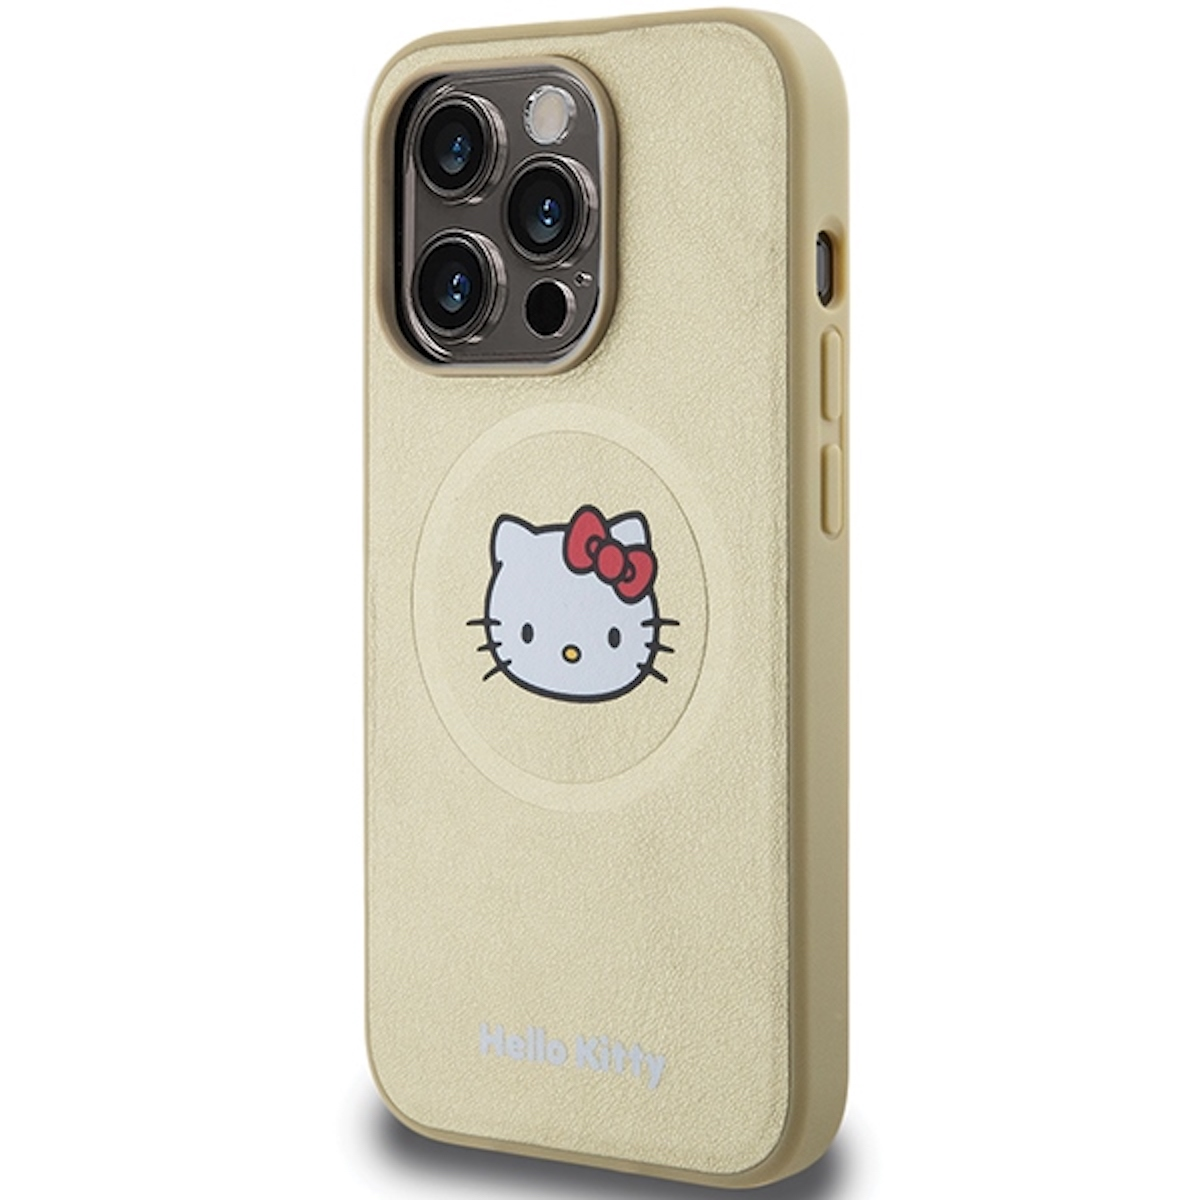 iPhone HELLO Cover BY Schutzhülle KITTY Gold CHEFMADE Leather Design, 15, Head Backcover, Kitty Apple, MagSafe